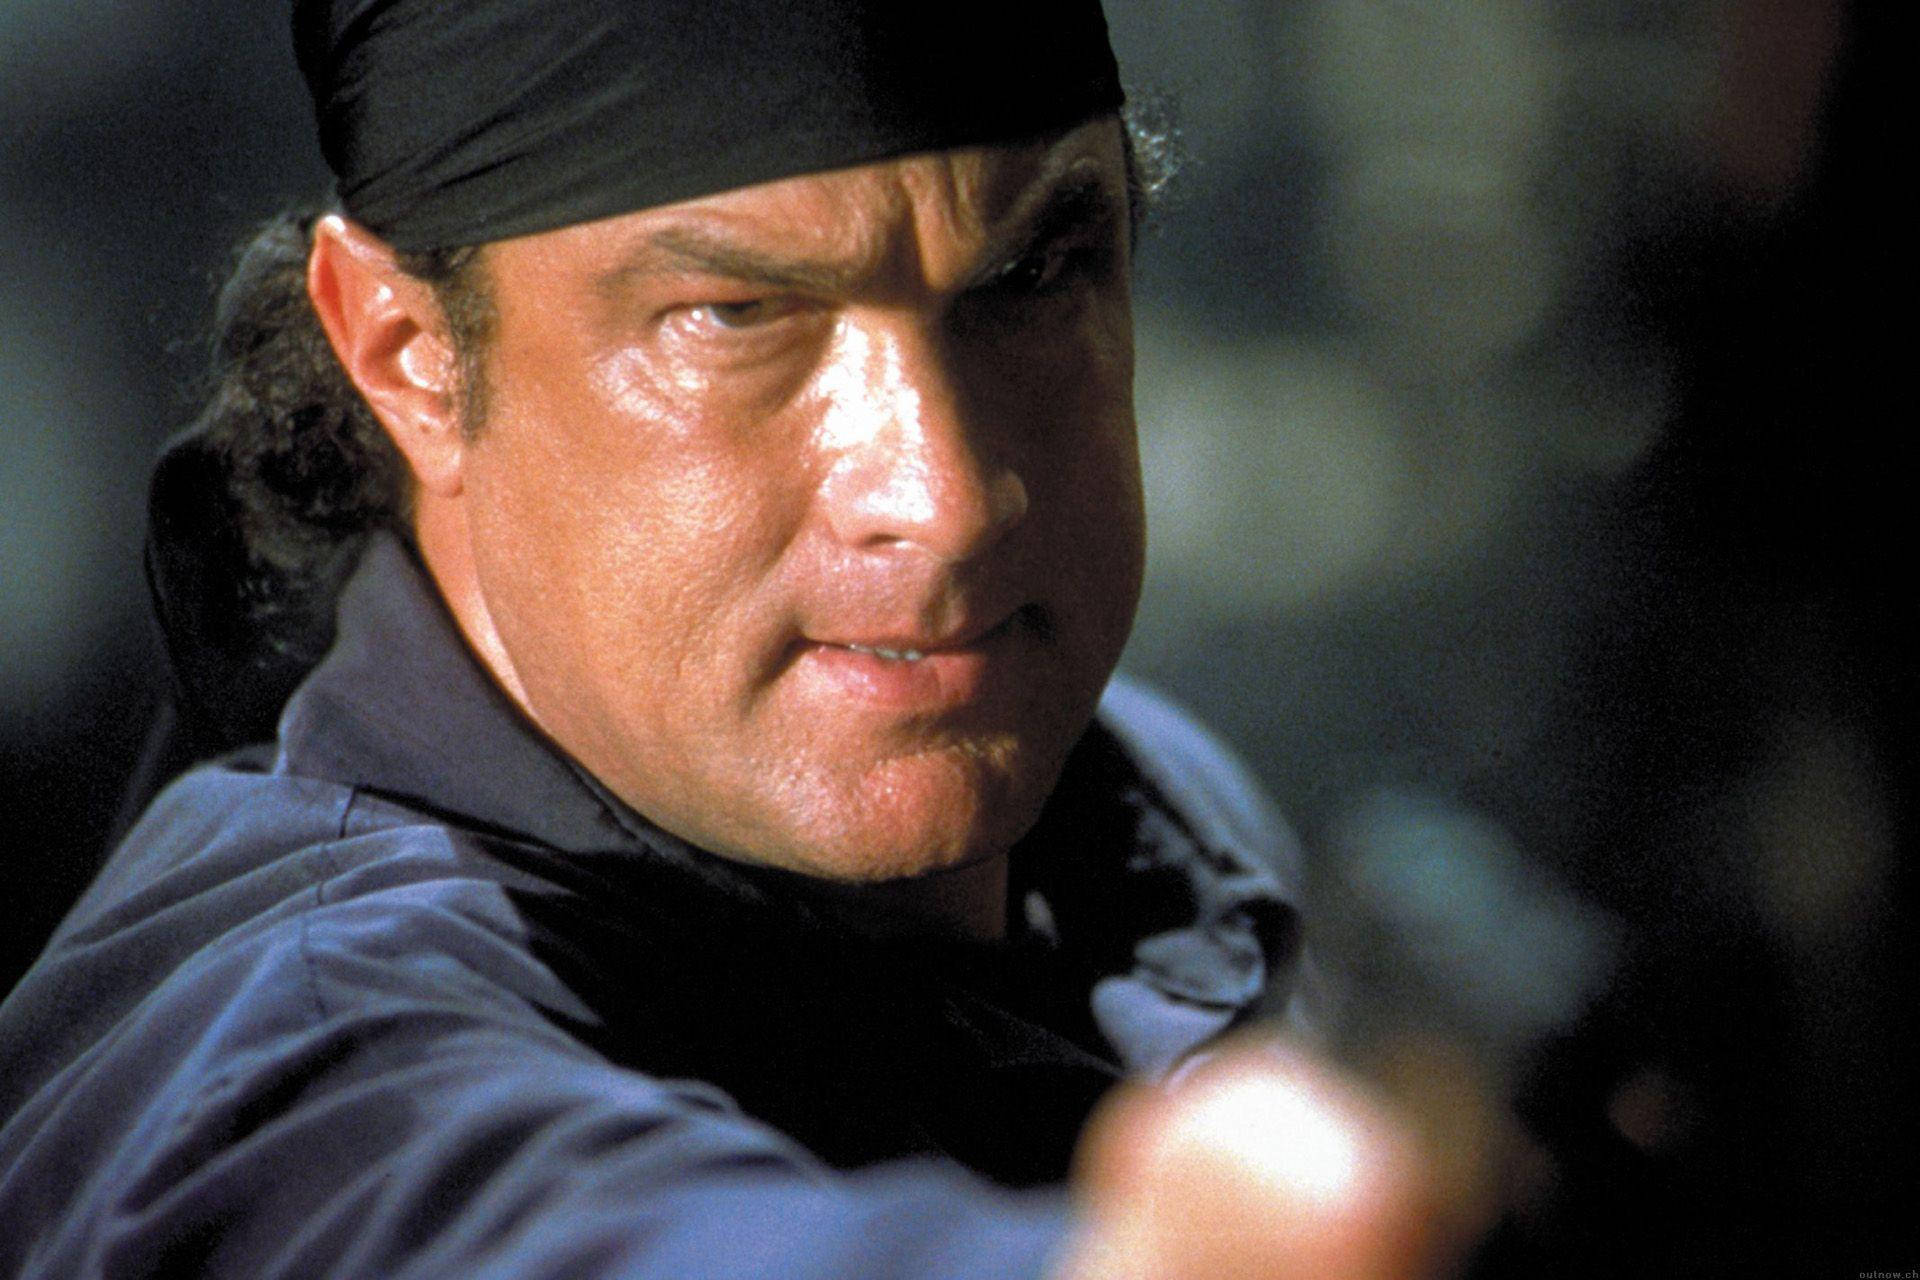 Steven Seagal - An Icon Of Action Cinema Background